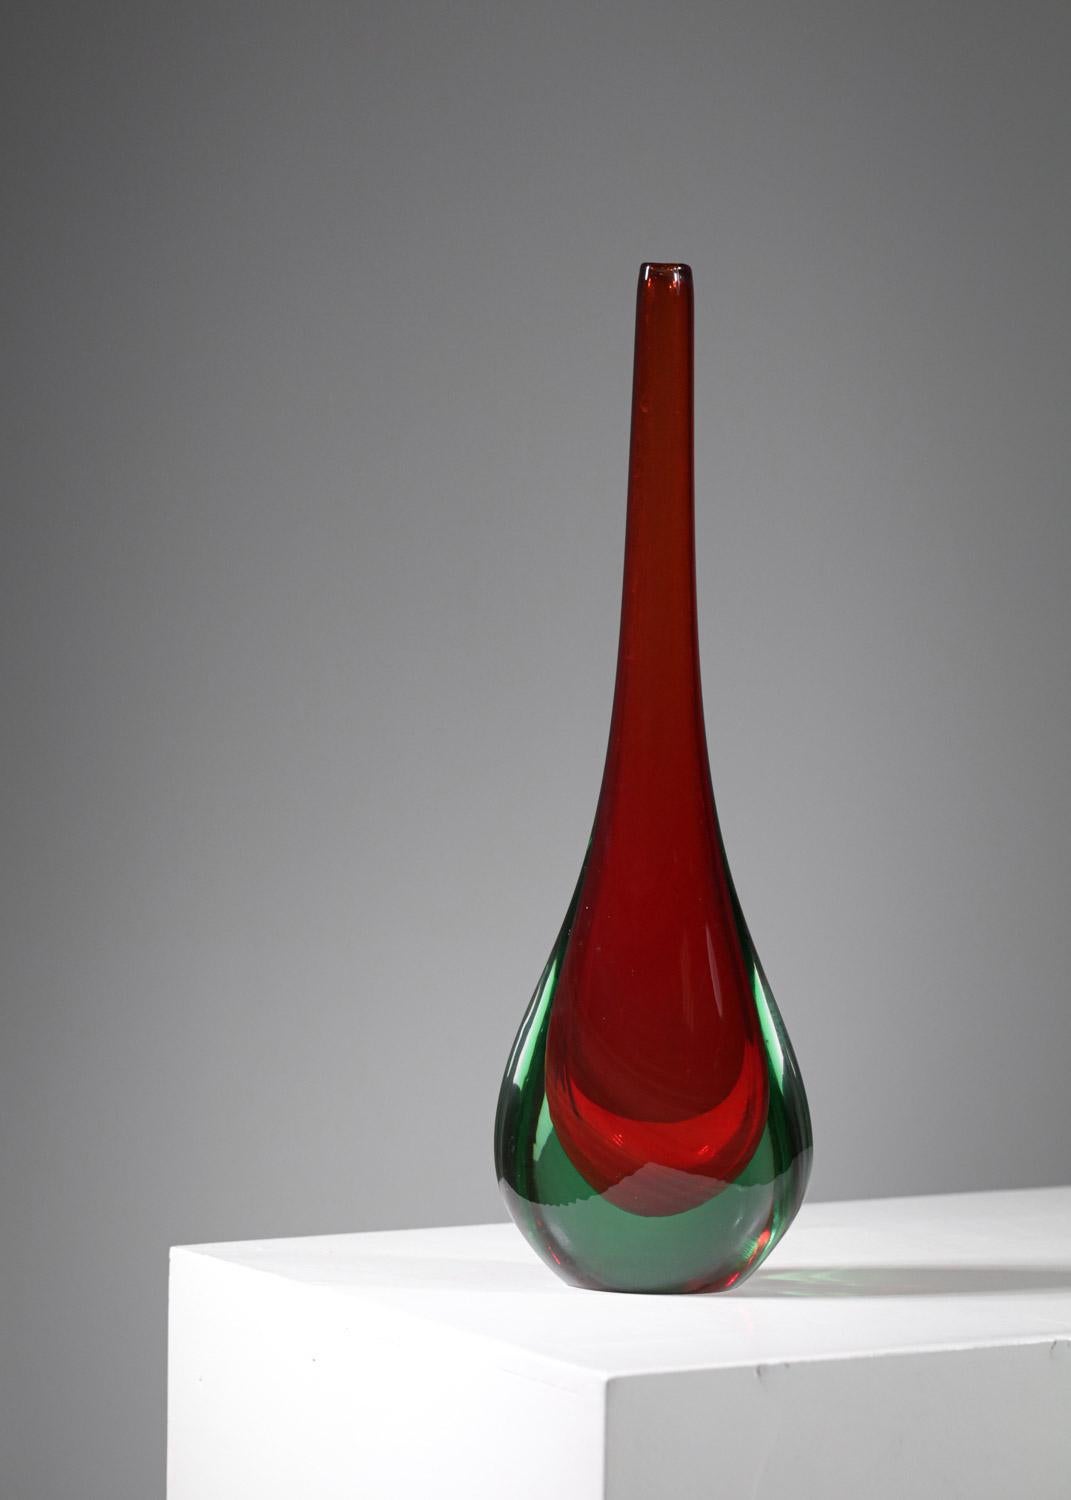 Very nice vase in blown glass of Murano from the 60s. Excellent craftsmanship with a beautiful shade of red light that enhances the simple and clean design of the vase drop. Very nice vintage condition (see photos).